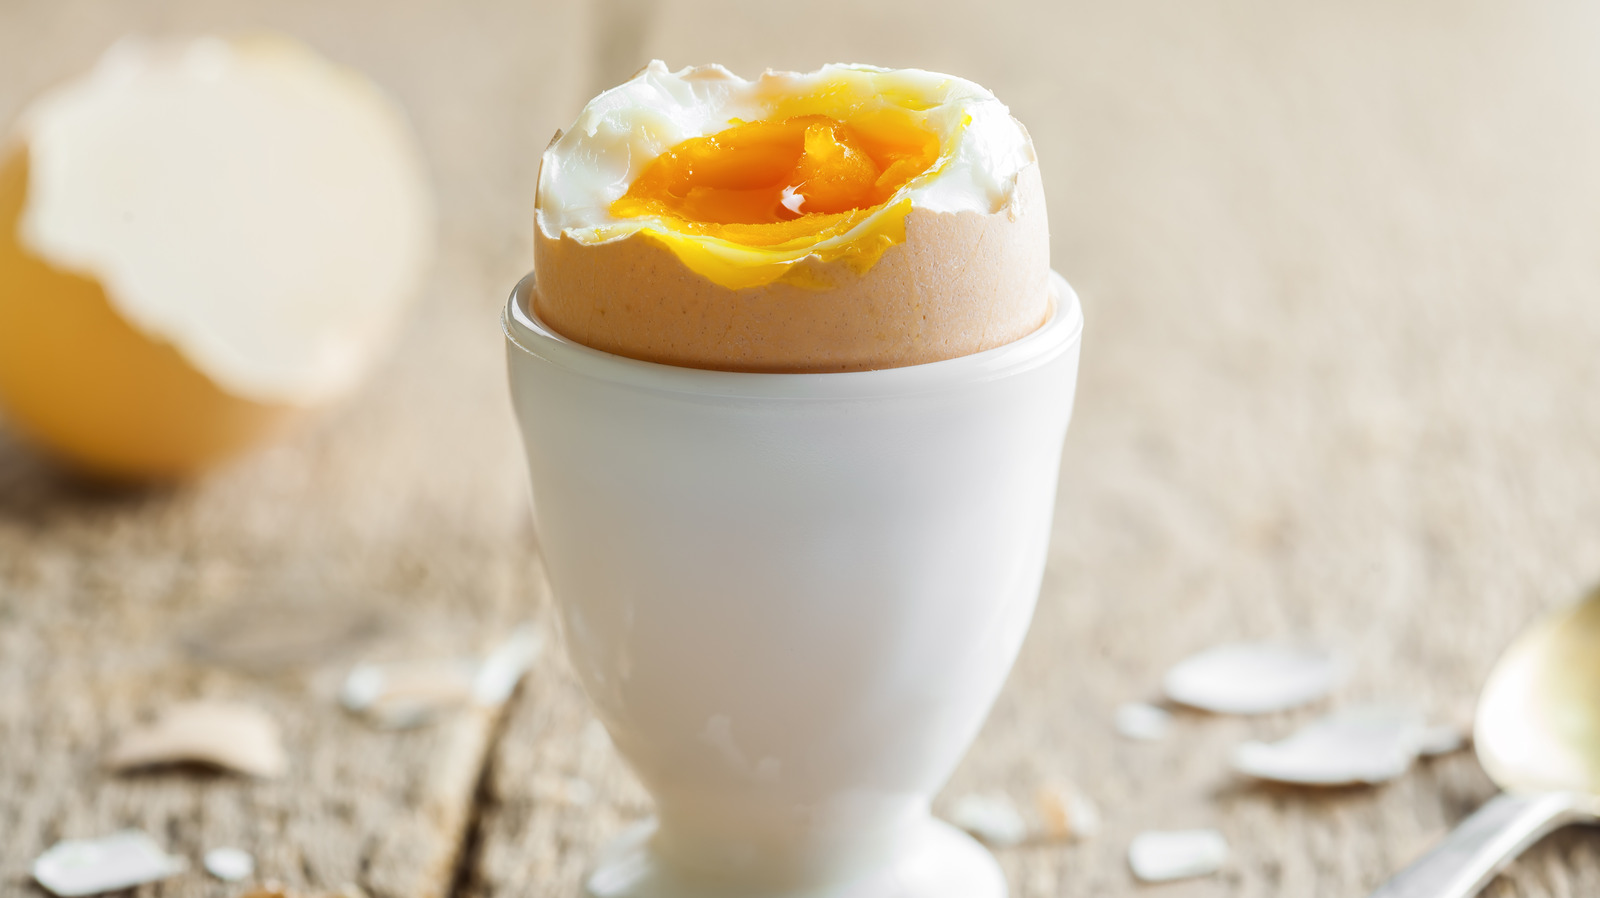 Quality, Durable soft boiled egg cooker For Convenience 